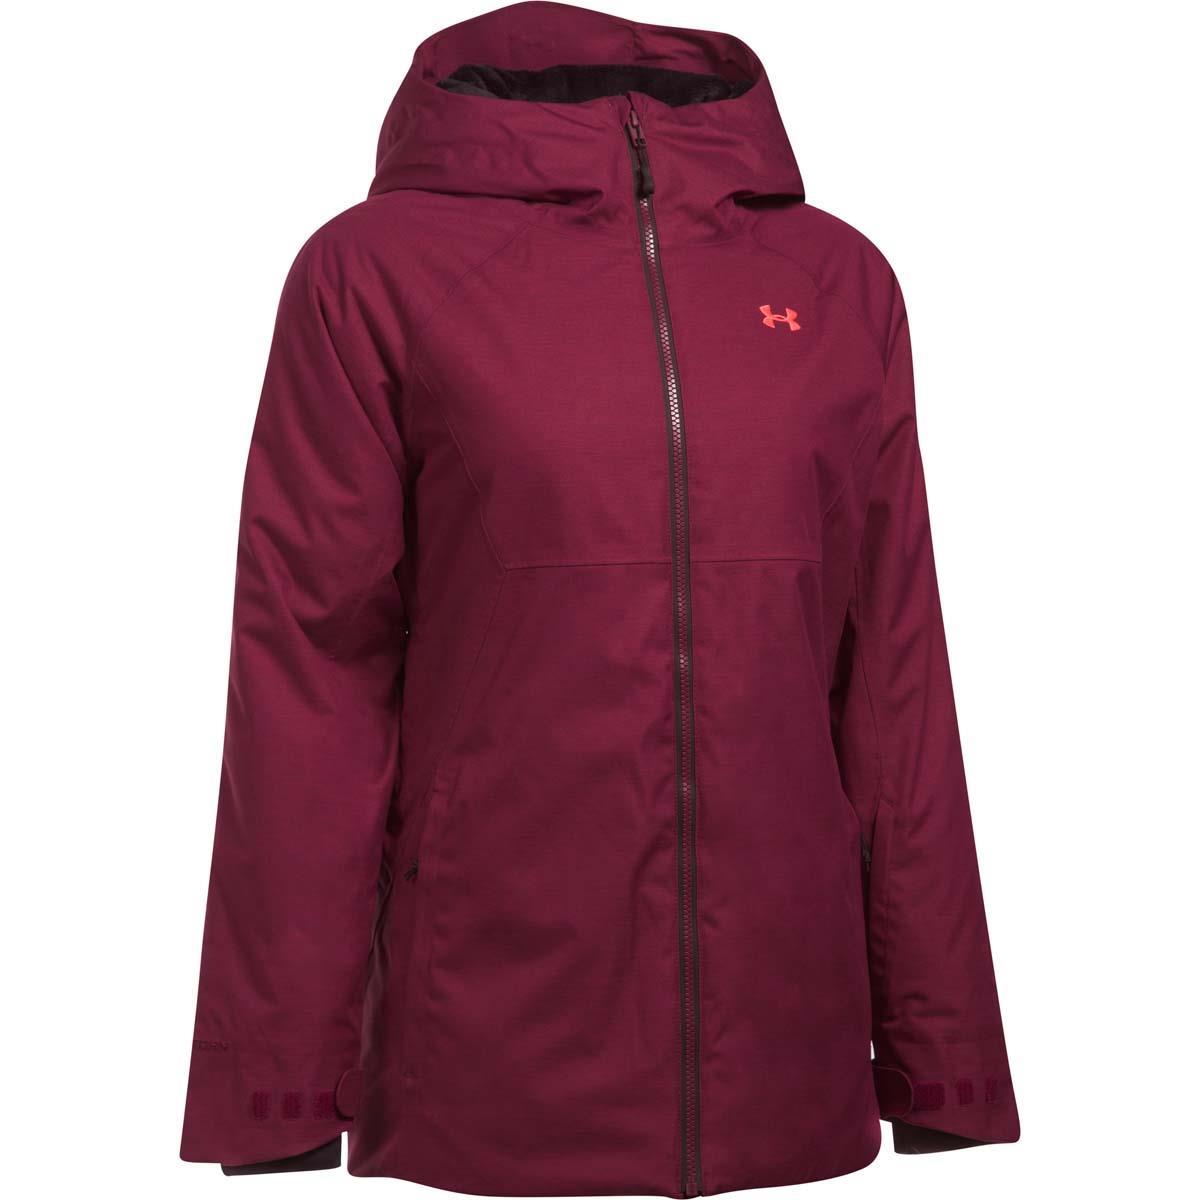 under armour red jacket